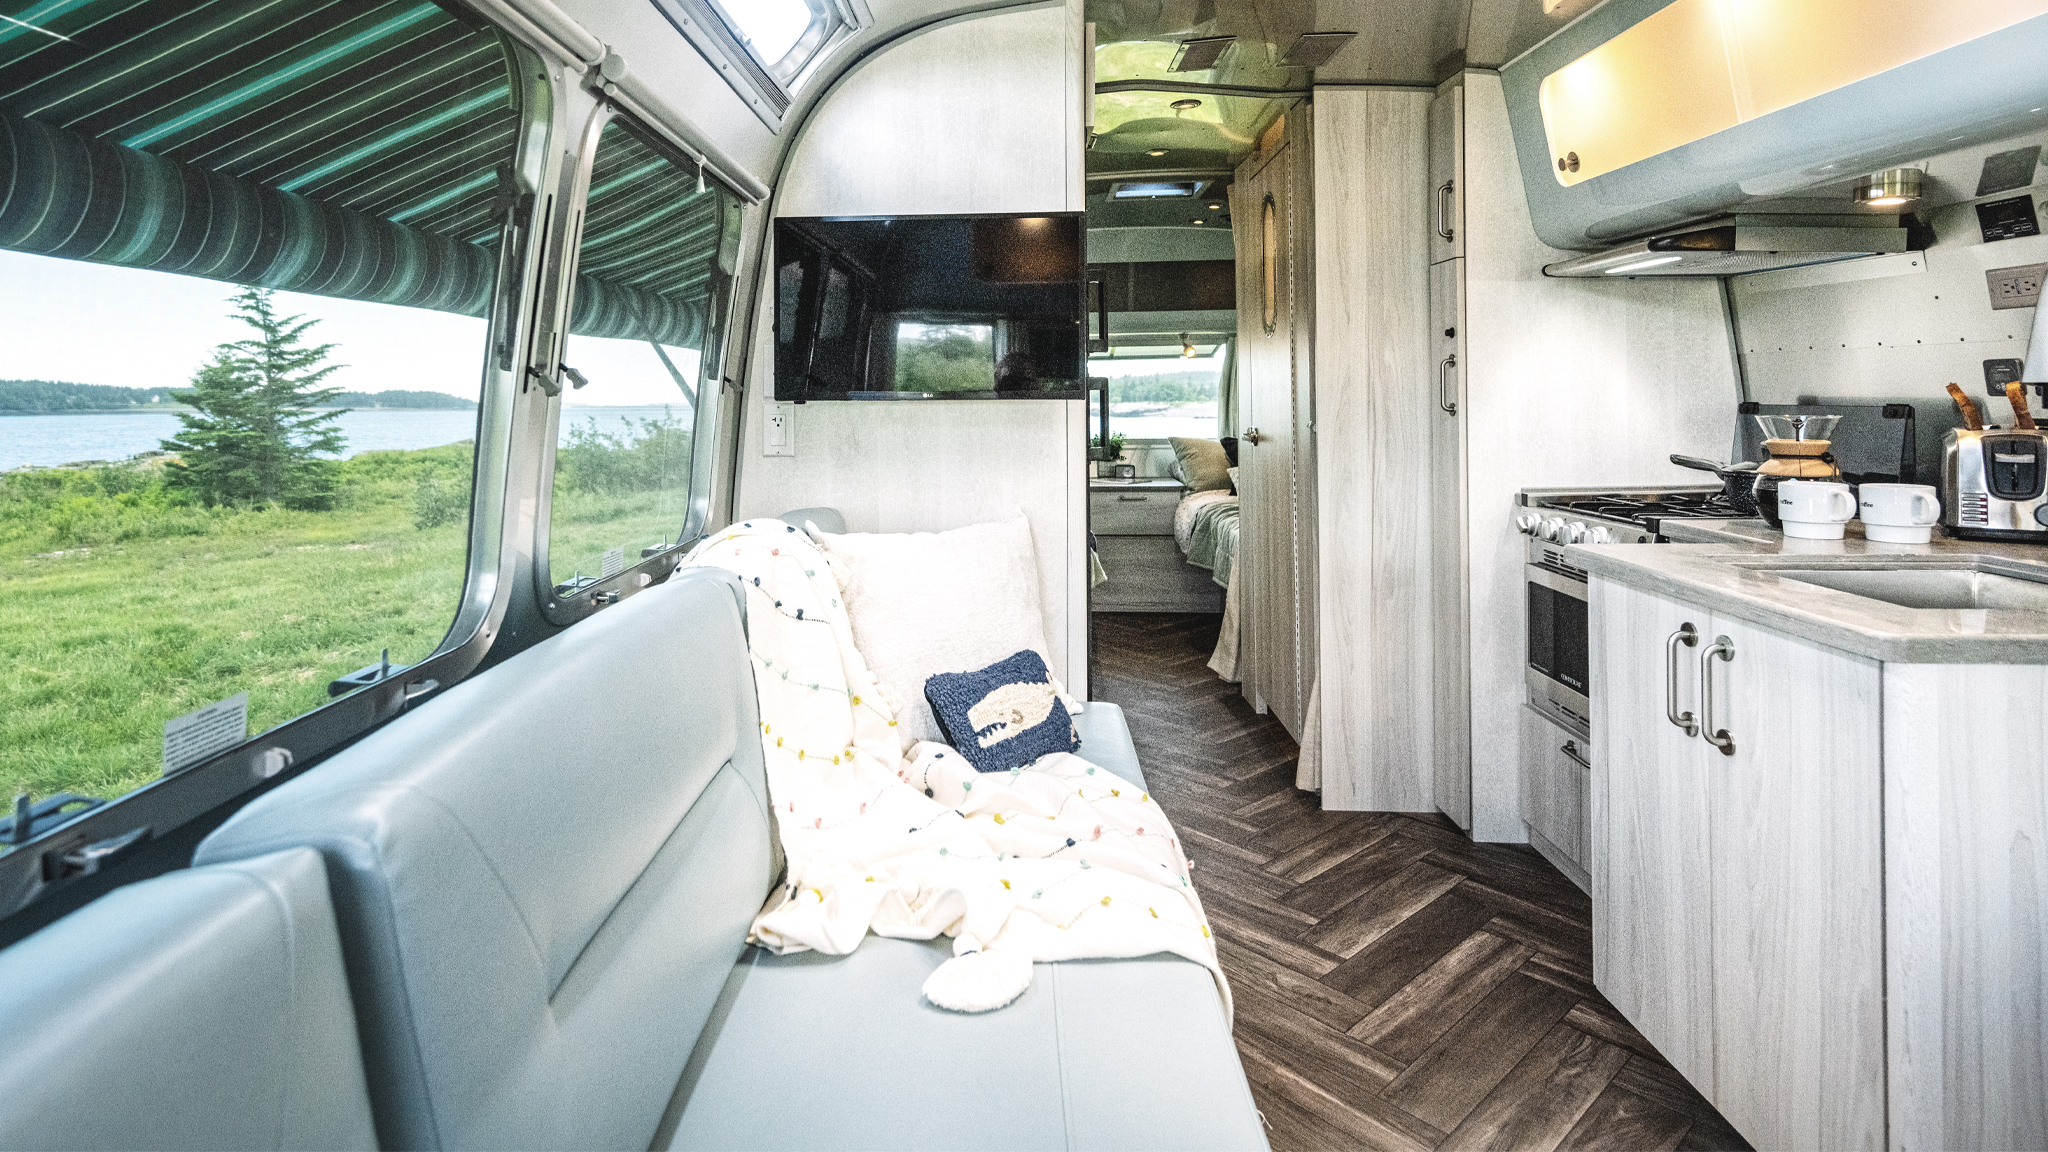 The interior of the International Airstream Travel Trailer with aqua seating and twin beds in the bedroom.